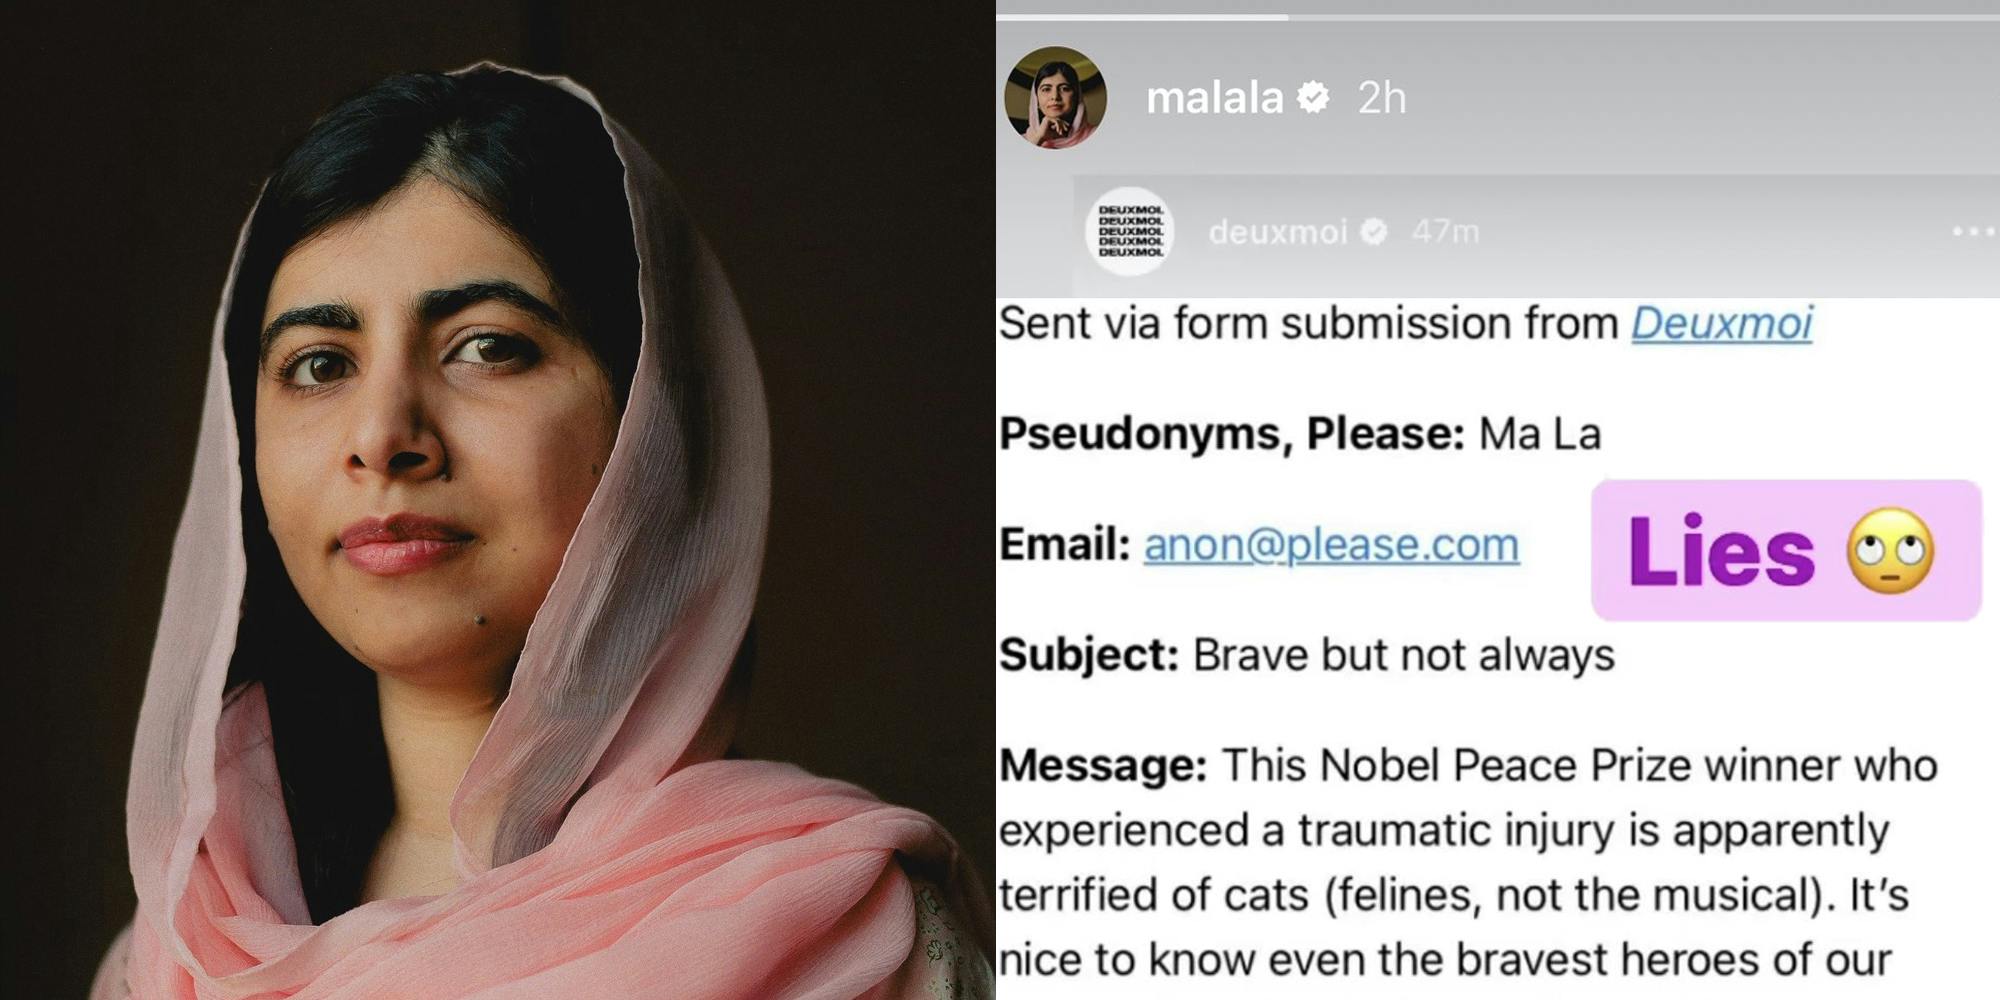 Malala in front of brown background (l) Malala Instagram story response caption "Sent via form submission from Deuxmoi Pseudonyms, Please: Ma La Email: anon@please.com Subject: Brave but not always Message: This Nobel Peace Prize winner who experienced a traumatic injury is apparently terrified of cats (felines, not the musical). It's nice to know even the bravest heroes of our..." "Lies" (r)